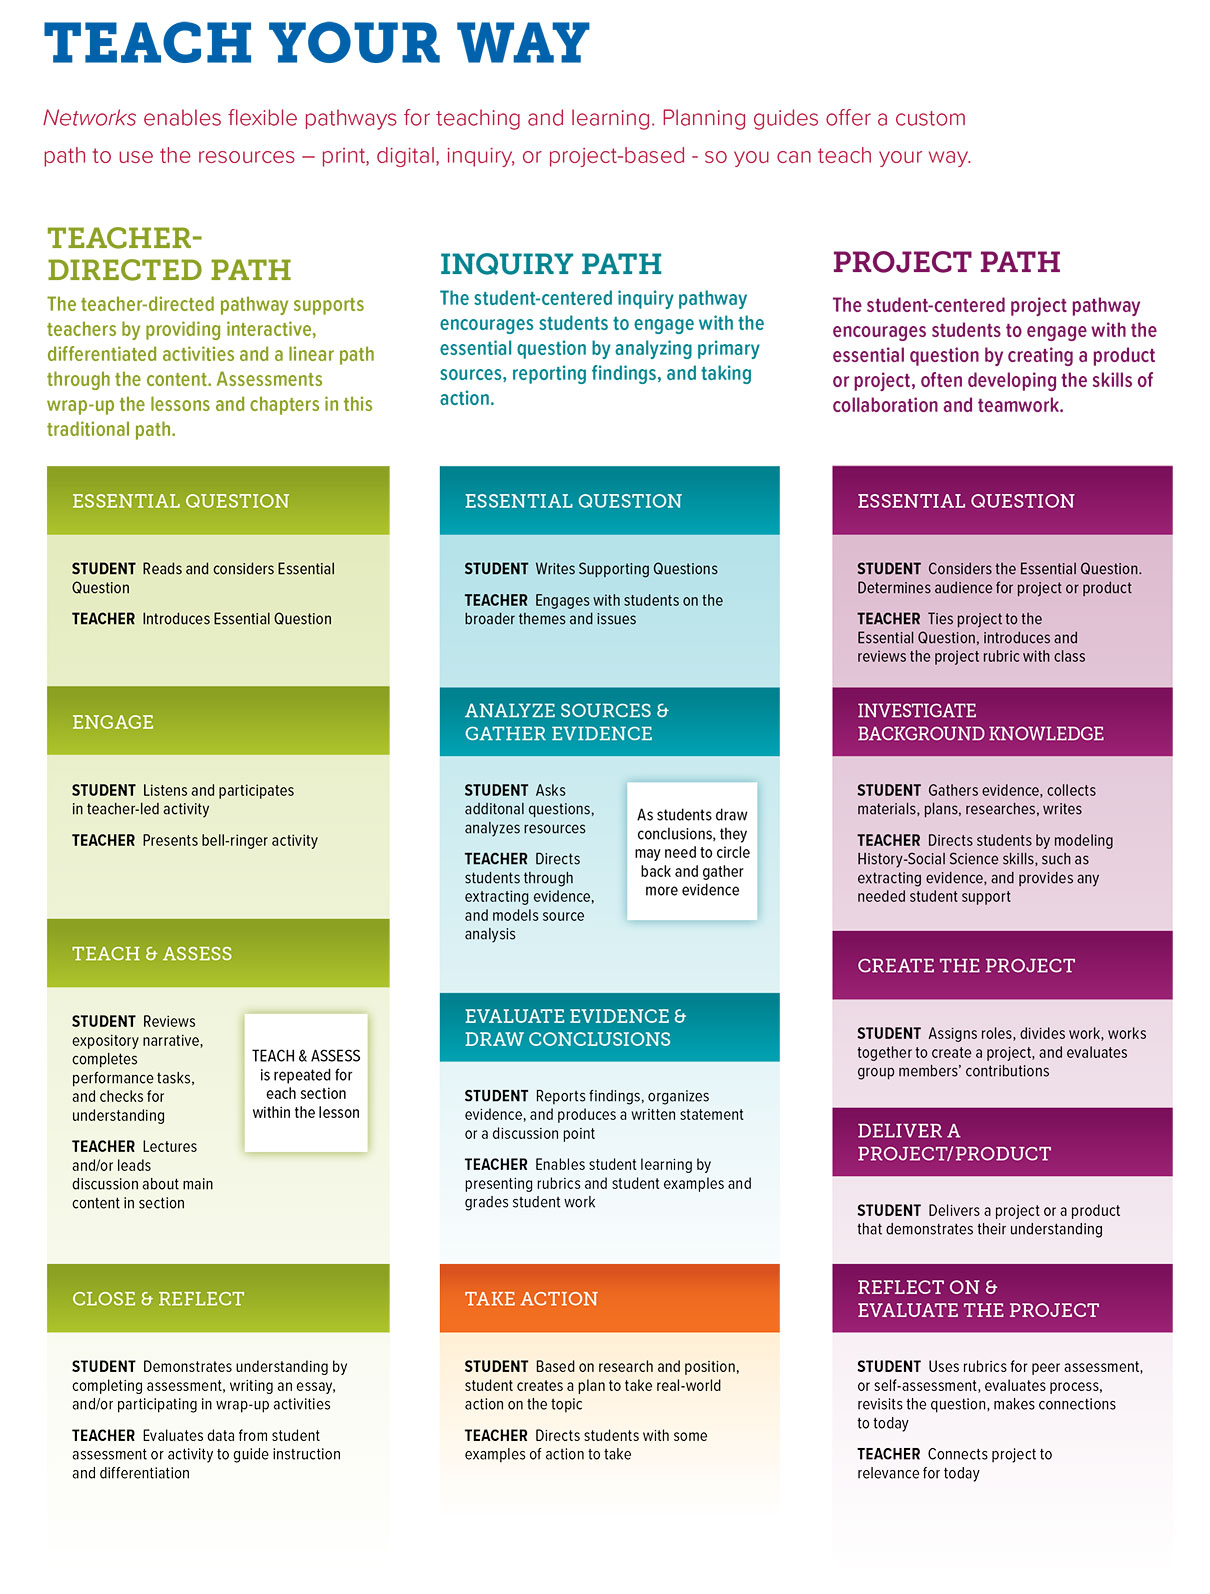 Teach your way chart showing flexible pathways in Networks: Teacher Directed Path, Inquiry Path, and Project Path 